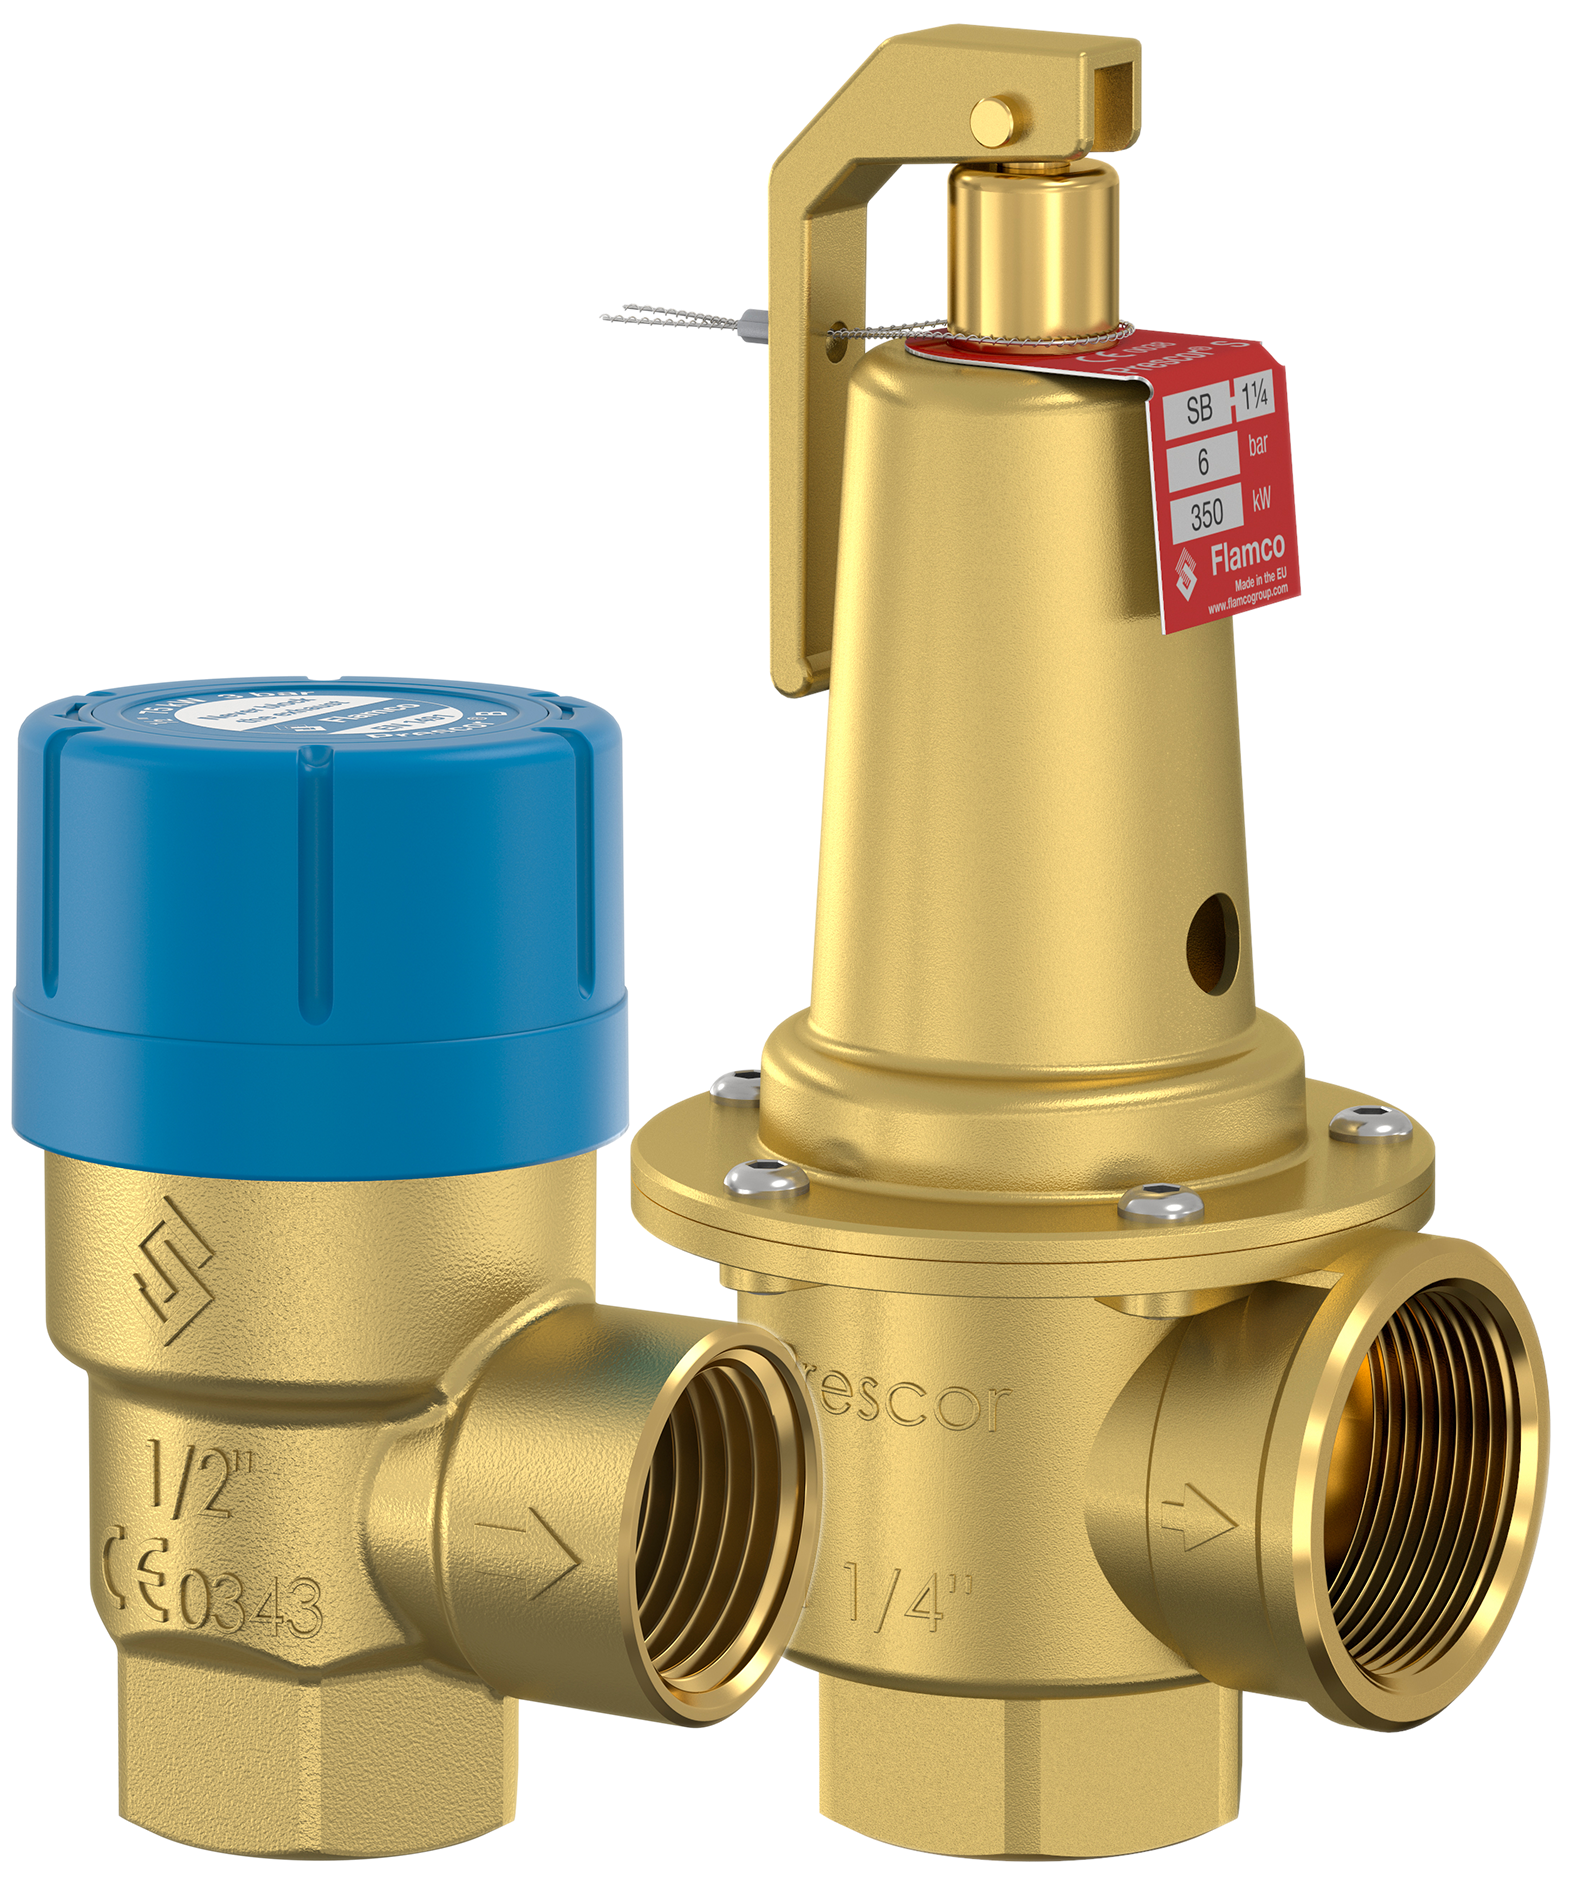 Prescor Safety Valves Water Heaters